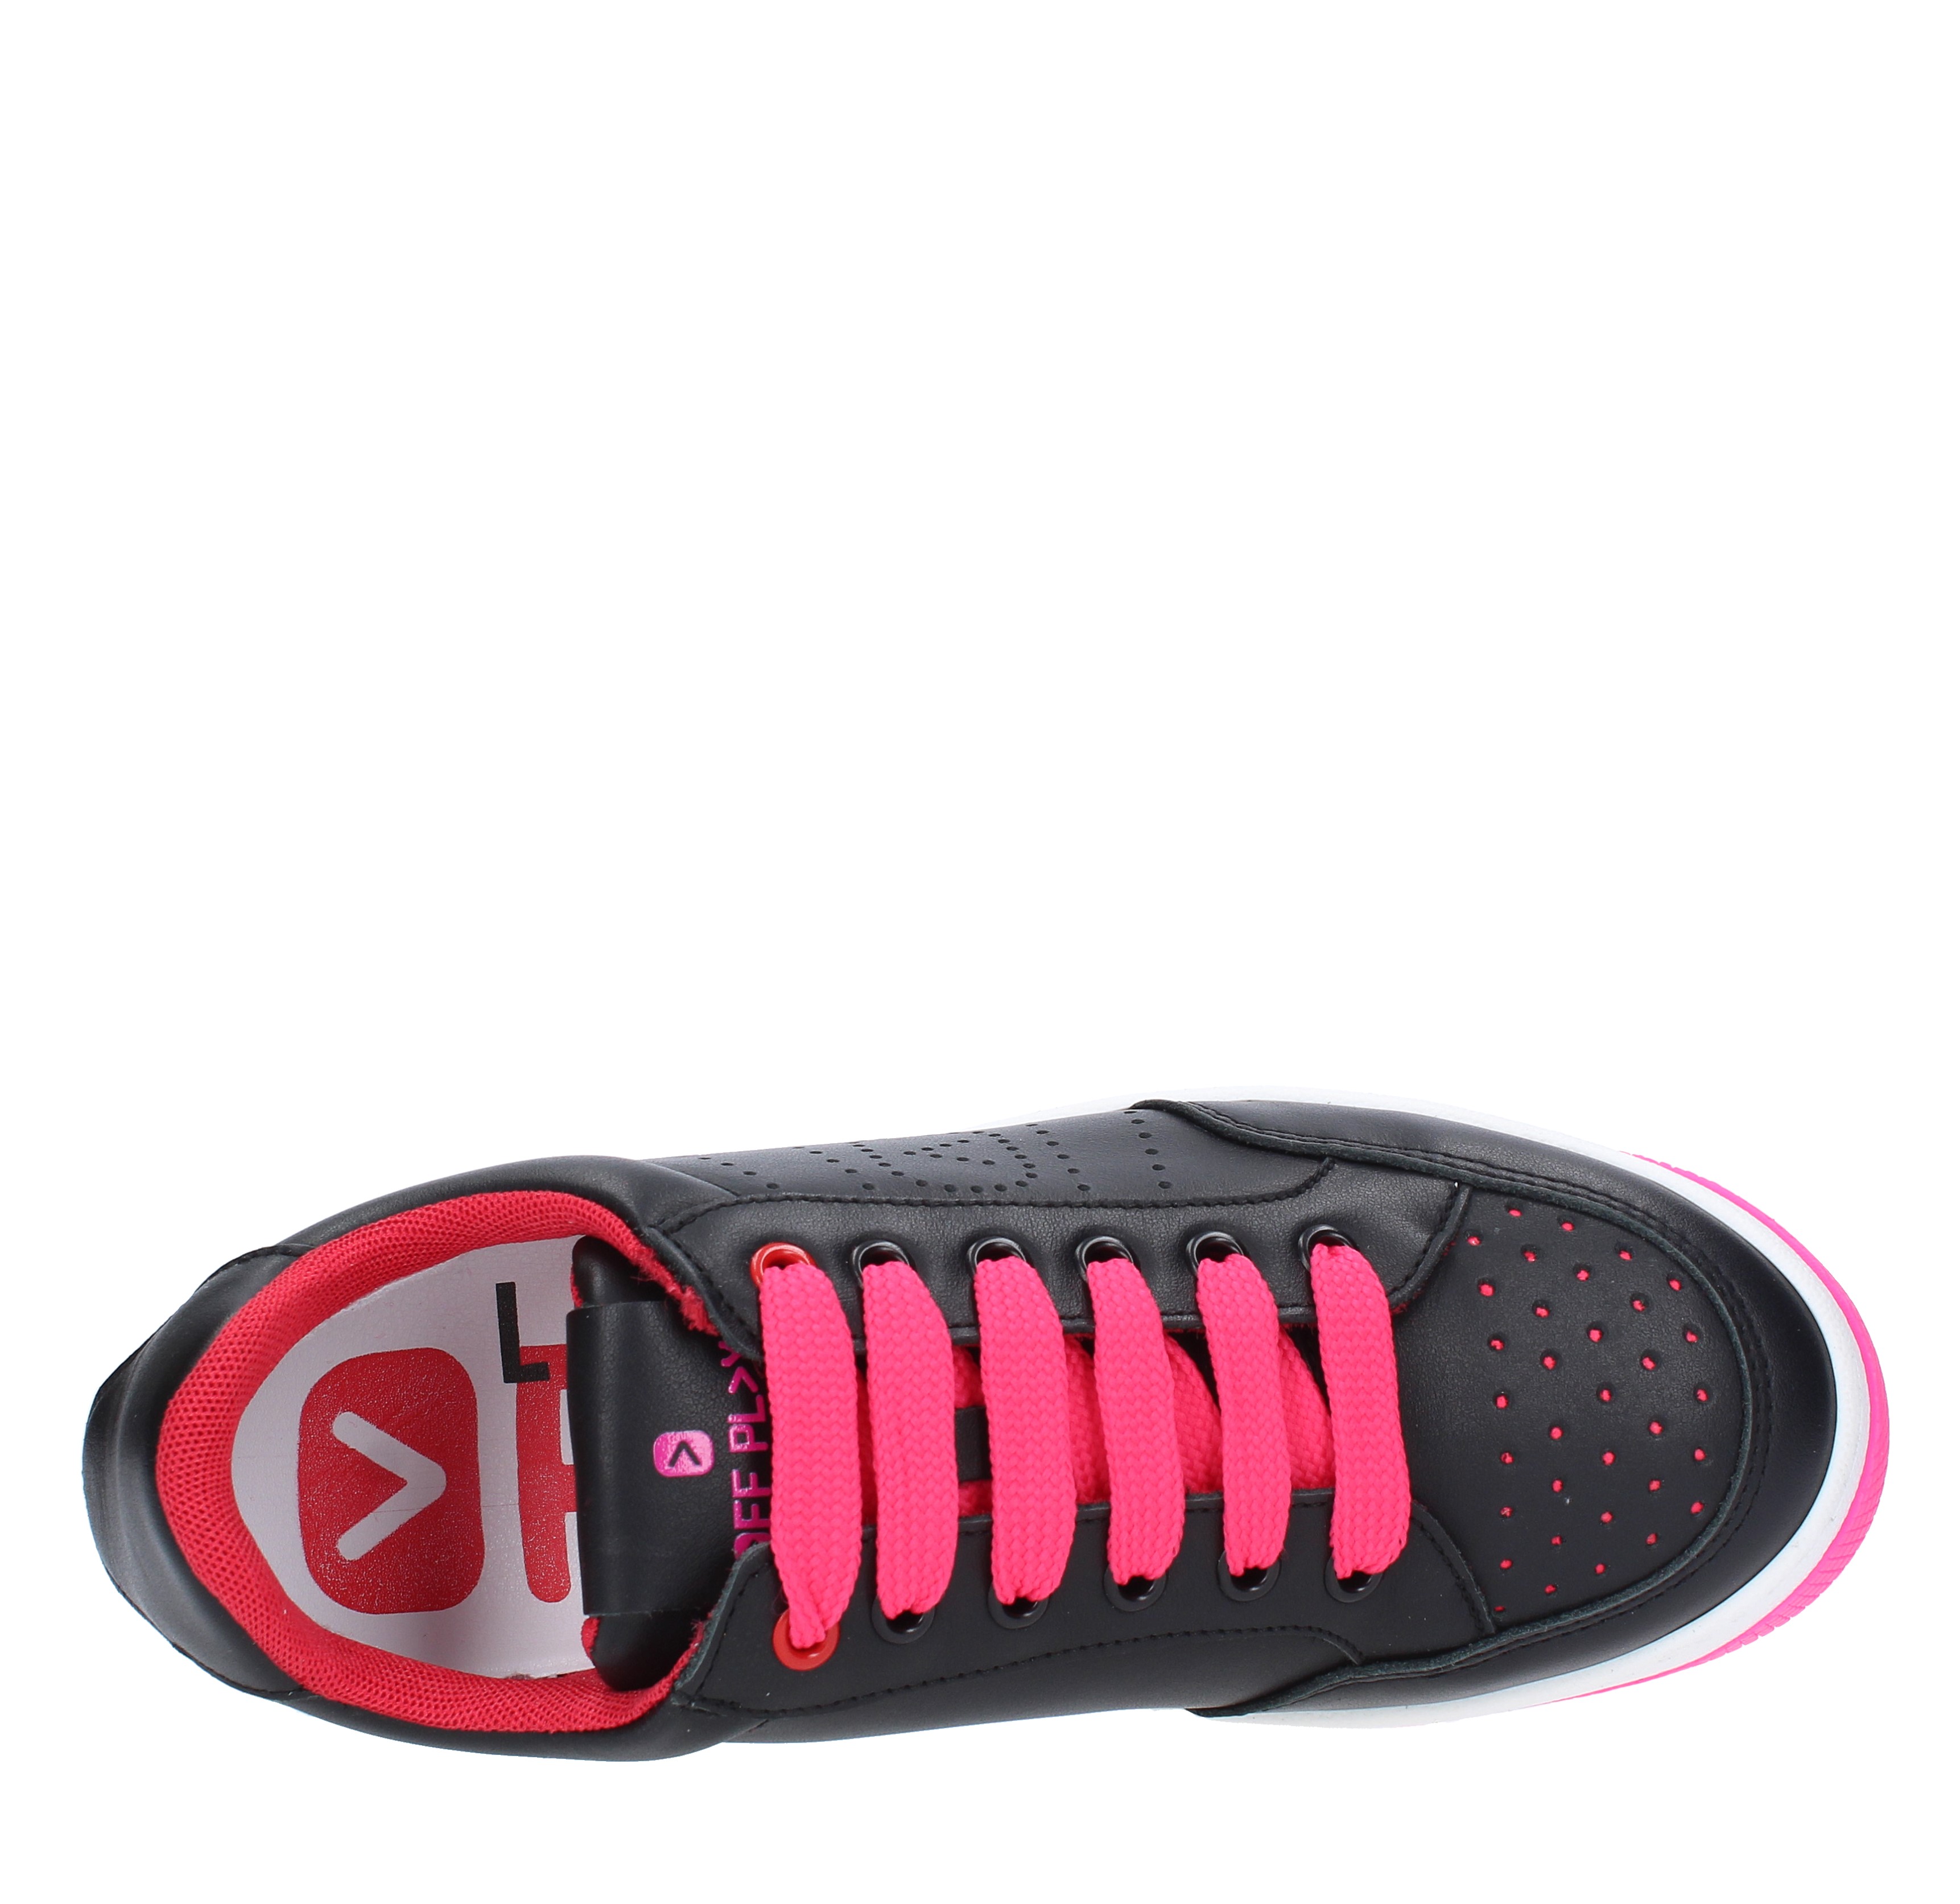 Leather trainers OFF PL>Y | LAKE 3NERO-FUXIA